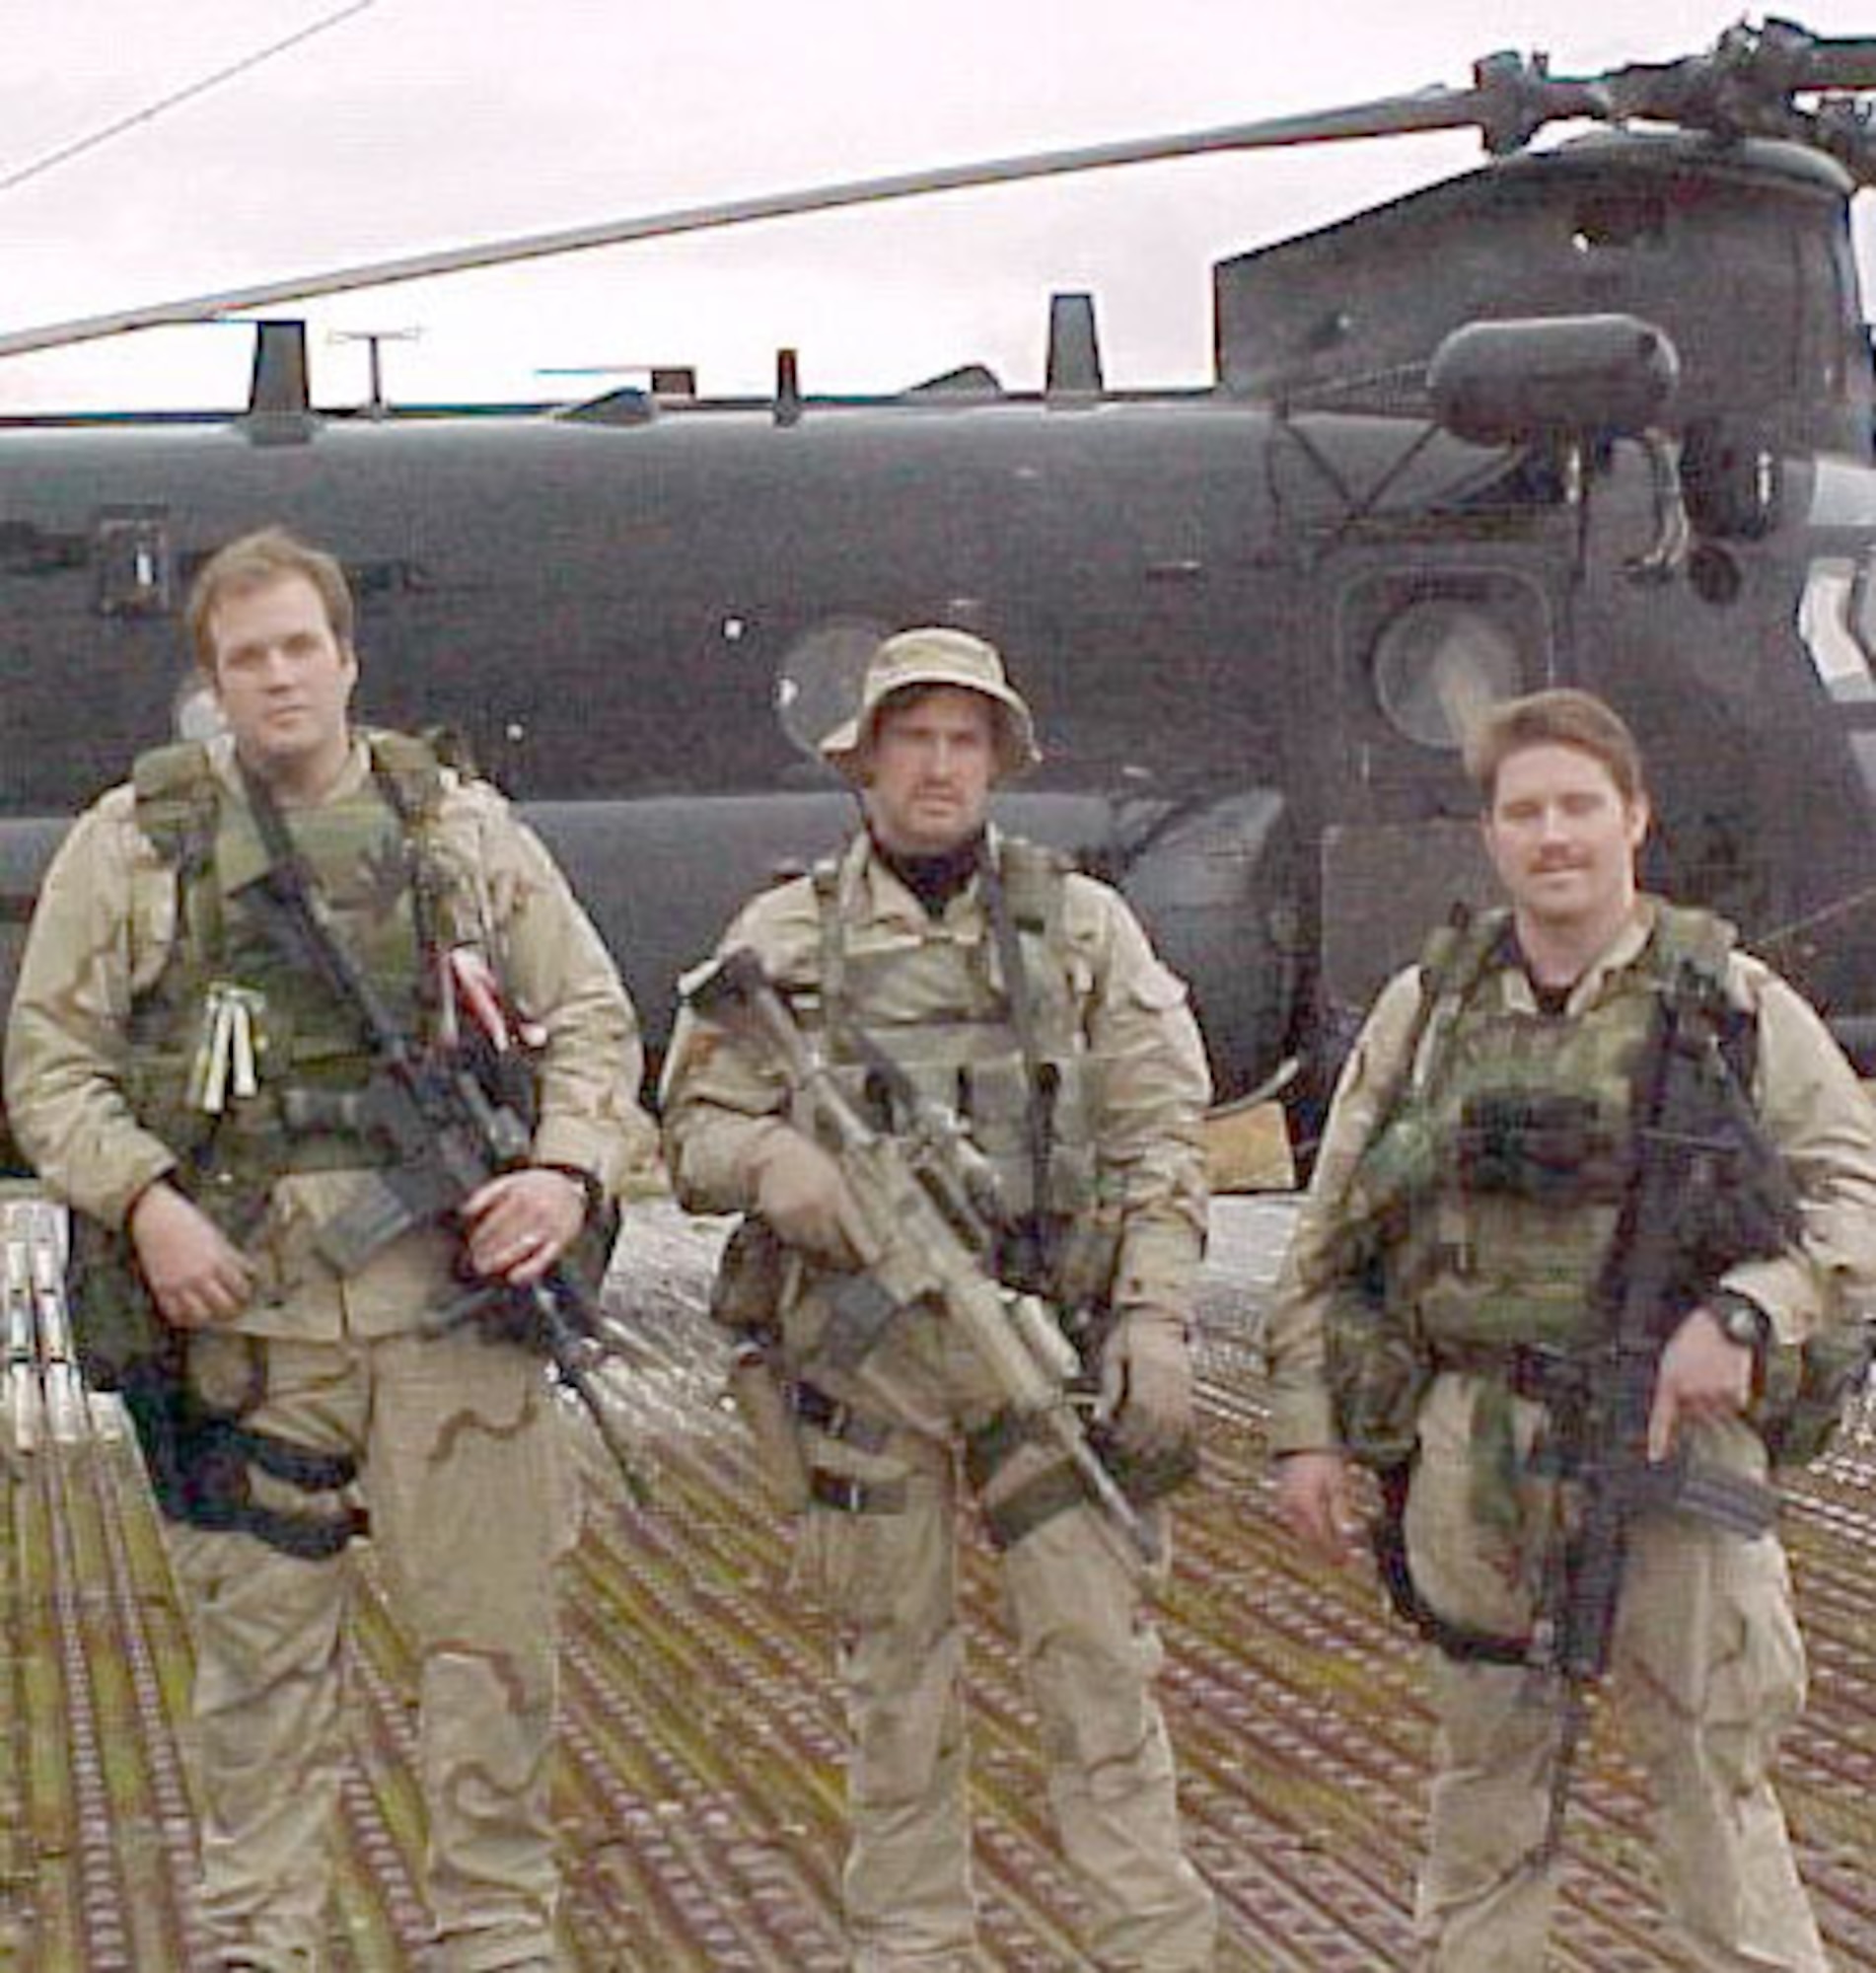 (From left to right) Tech. Sgt. Keary Miller, Senior Airman Jason Cunningham and Staff Sgt. Gabe Brown about three weeks before the battle. Behind them is a MH-47E, the same type of helicopter that took them to Takur Ghar. (U.S. Air Force photo)